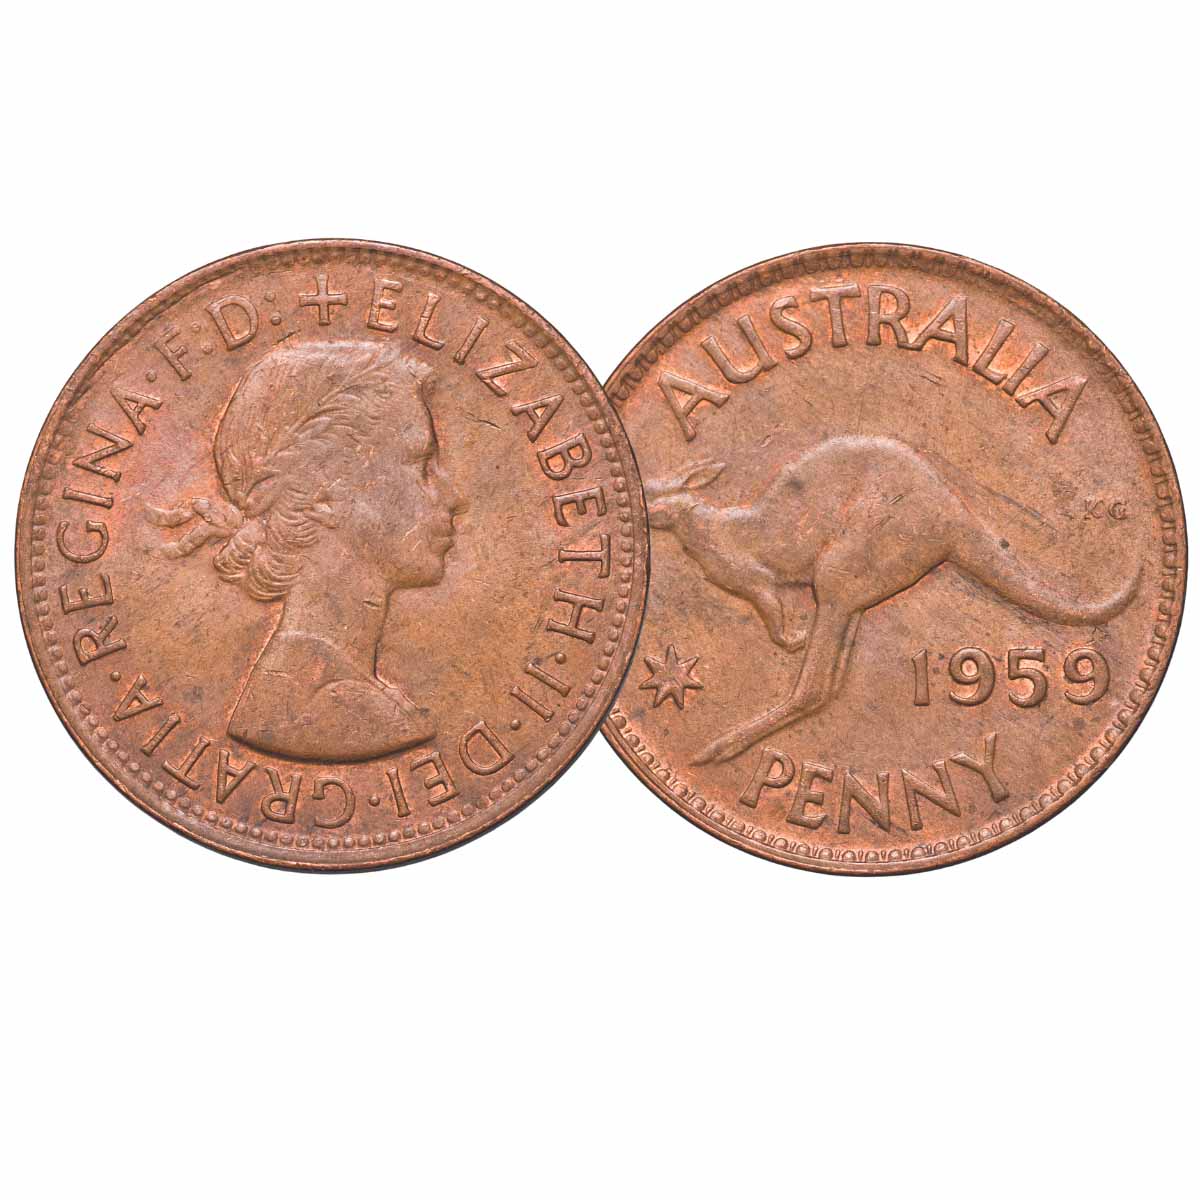 Australia George VI 1959 Penny about Uncirculated